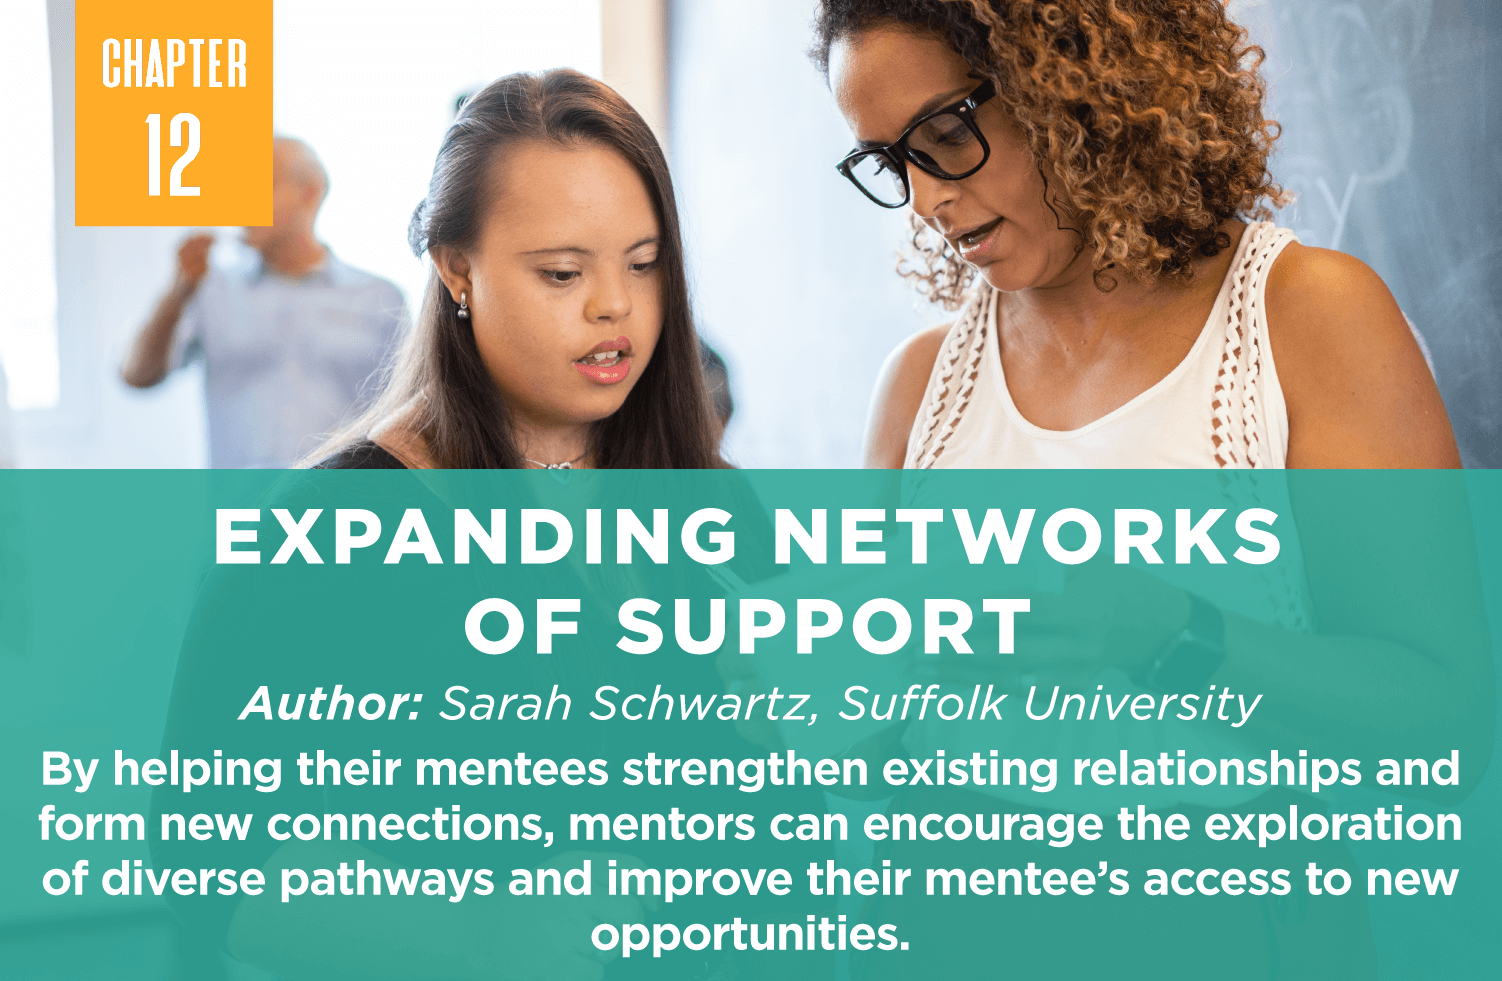 Expanding Networks
of Support
Author: Sarah Schwartz, Suffolk University
By helping their mentees strengthen existing relationships and form new connections, mentors can encourage the exploration of diverse pathways and improve their mentee’s access to new opportunities.